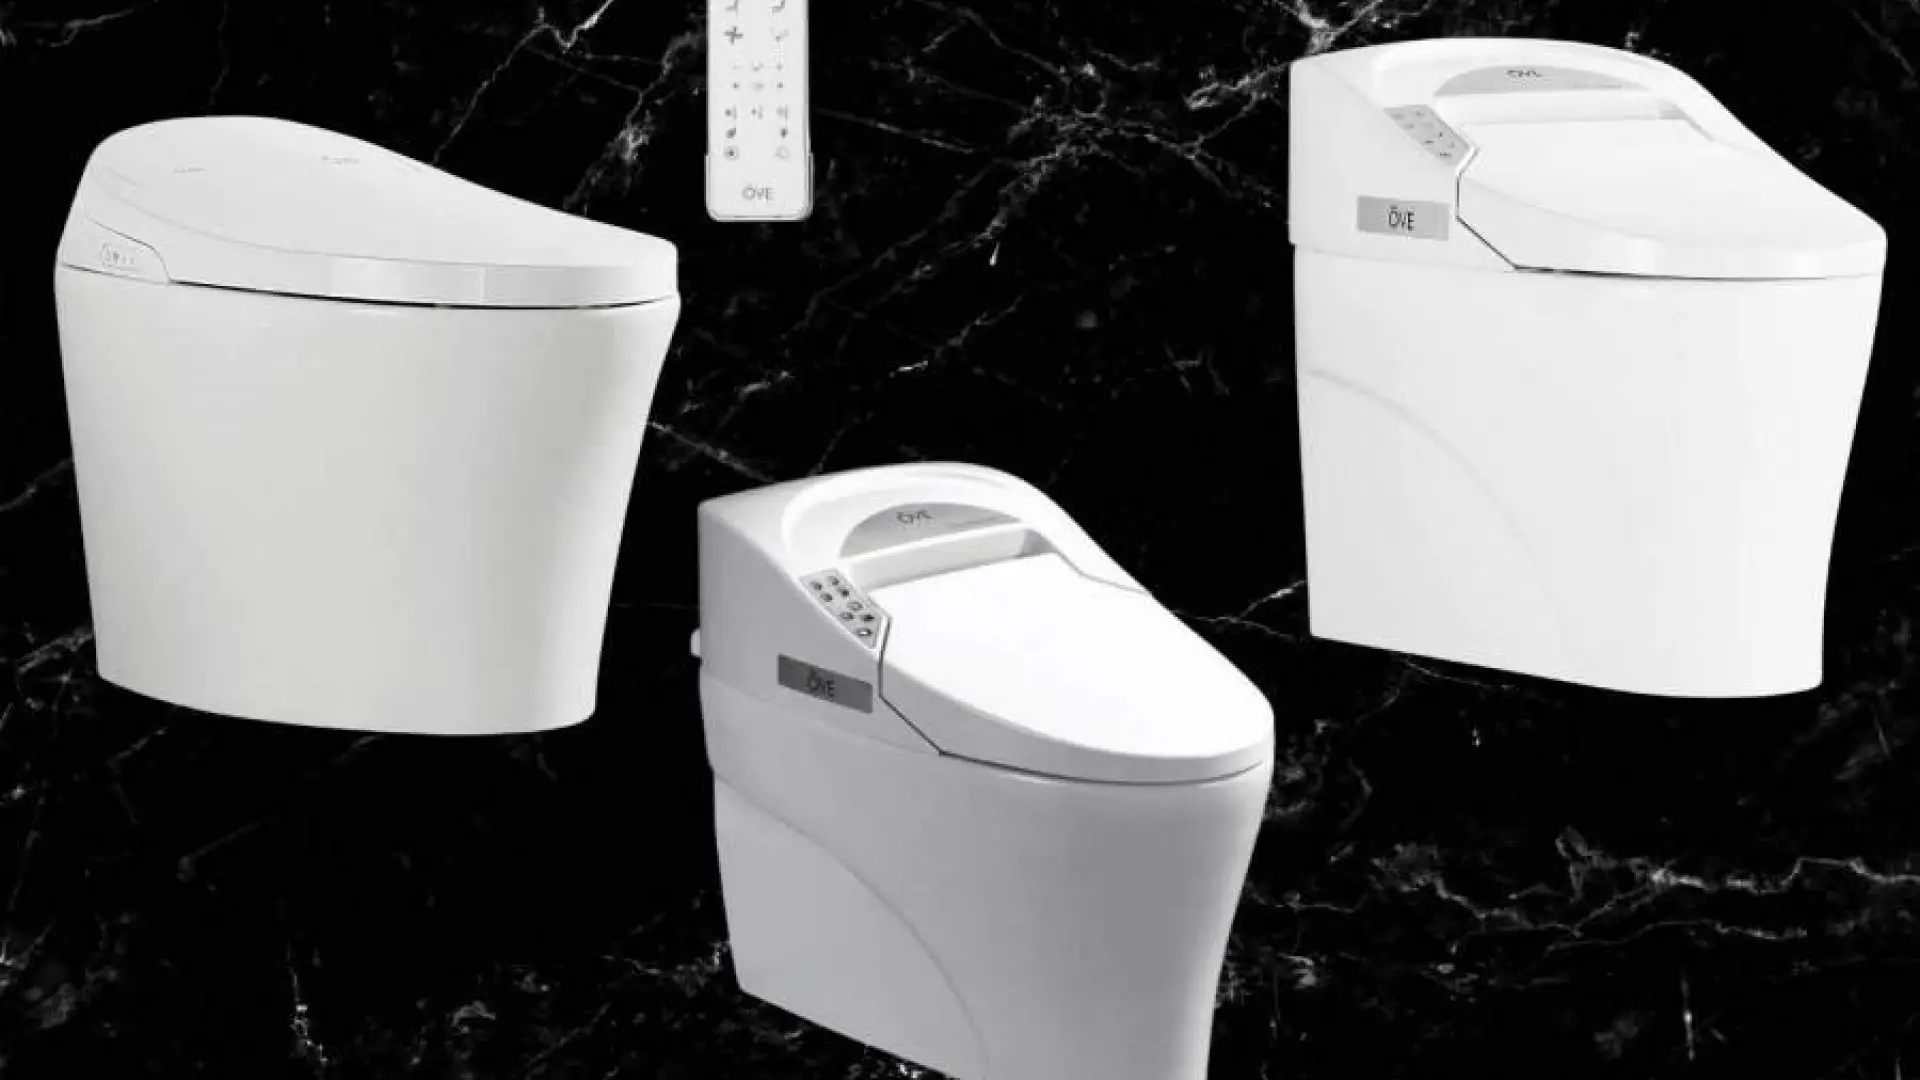 Ove Toilet: Review of the Best 3 OVE DECOR Smart Bidets